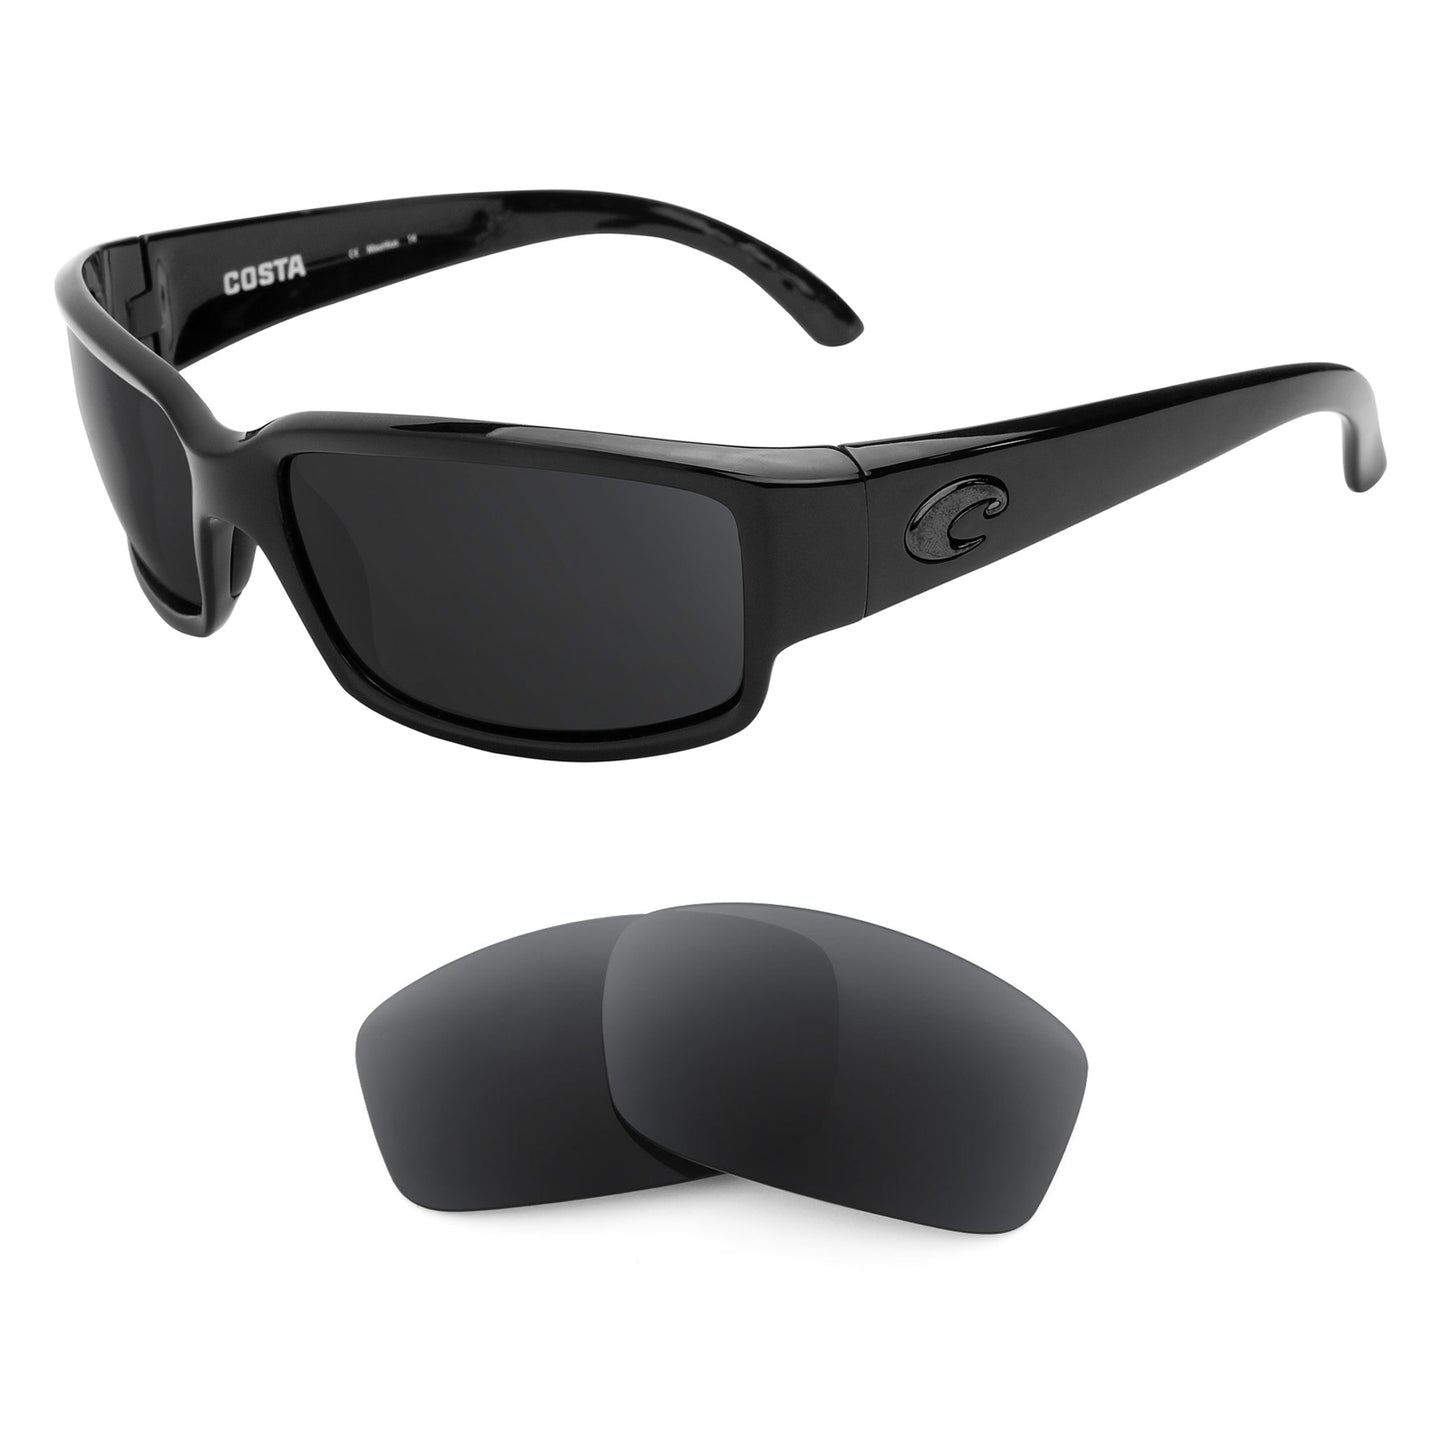 Costa Caballito sunglasses with replacement lenses